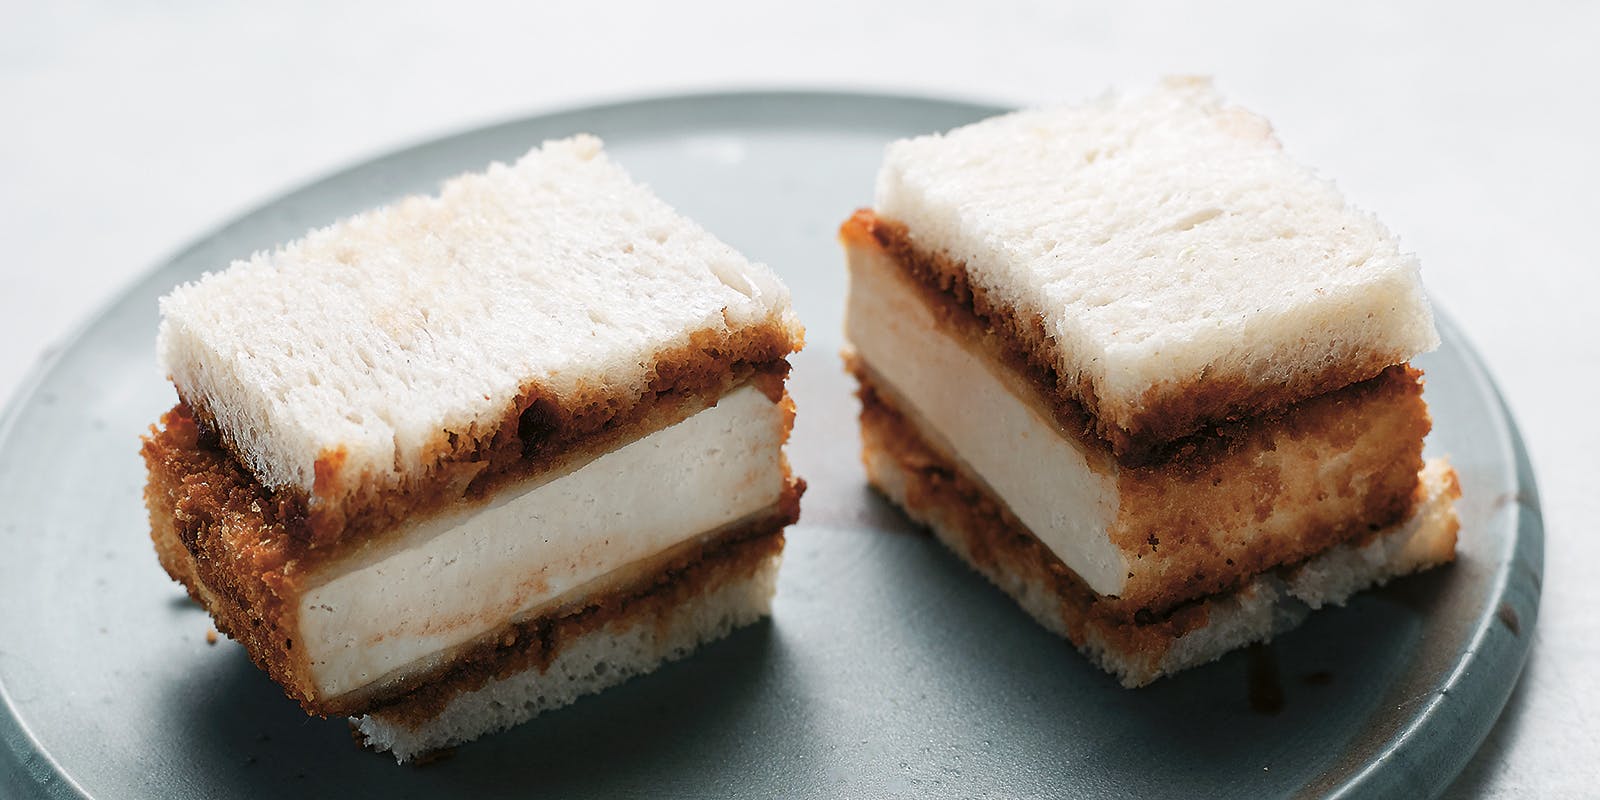 Fried tofu sandwich with Japanese barbecue sauce